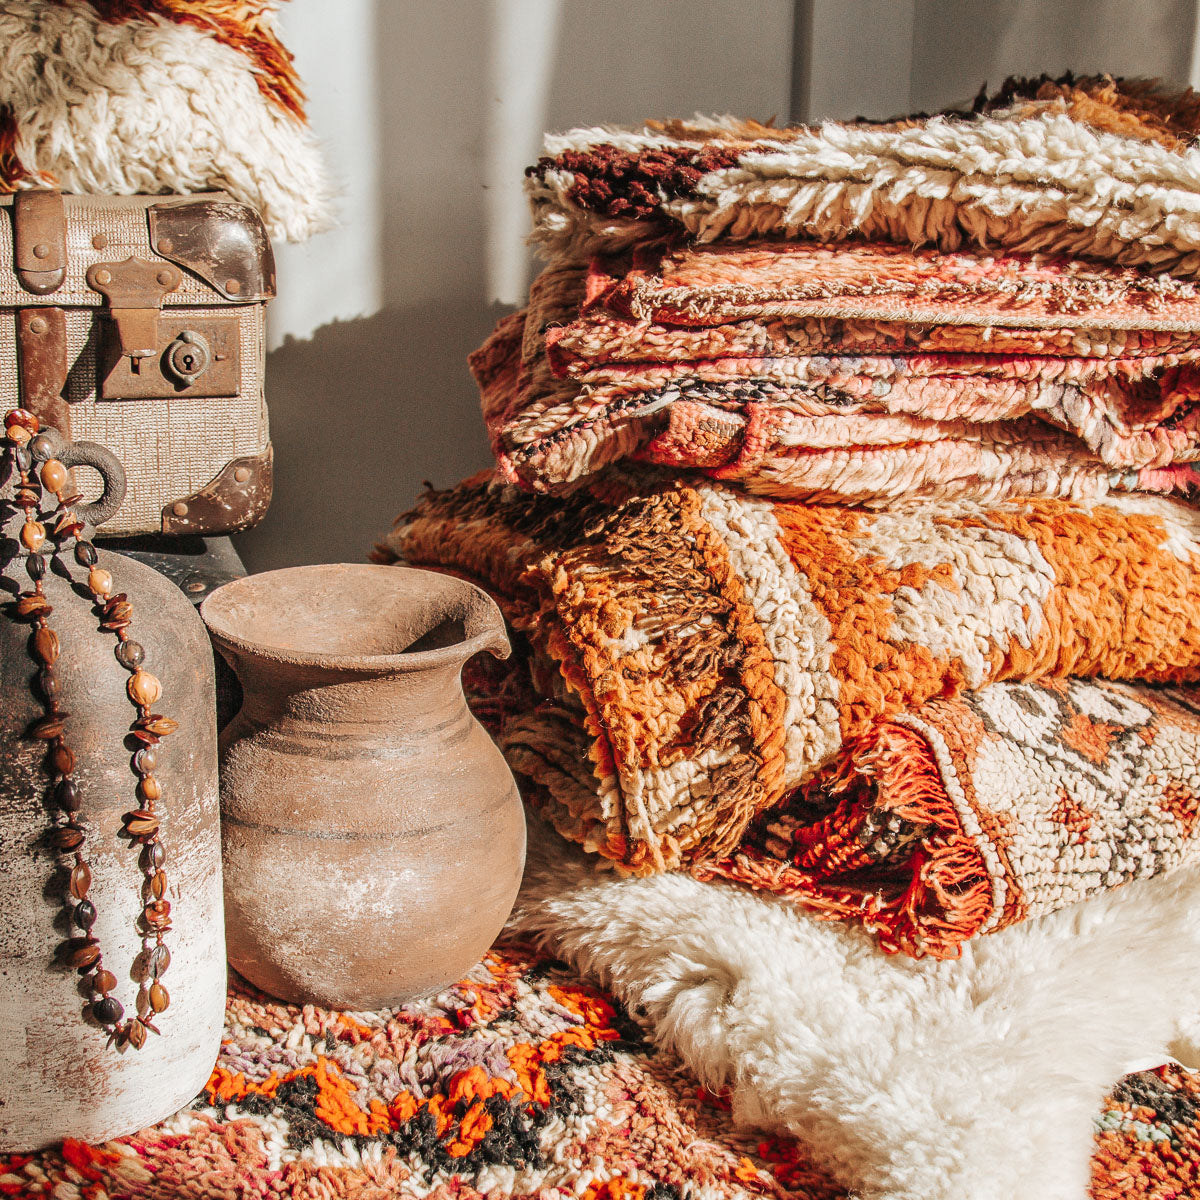 Eclectic mix of vintage homewares, moroccan rugs, clay jars and beads 